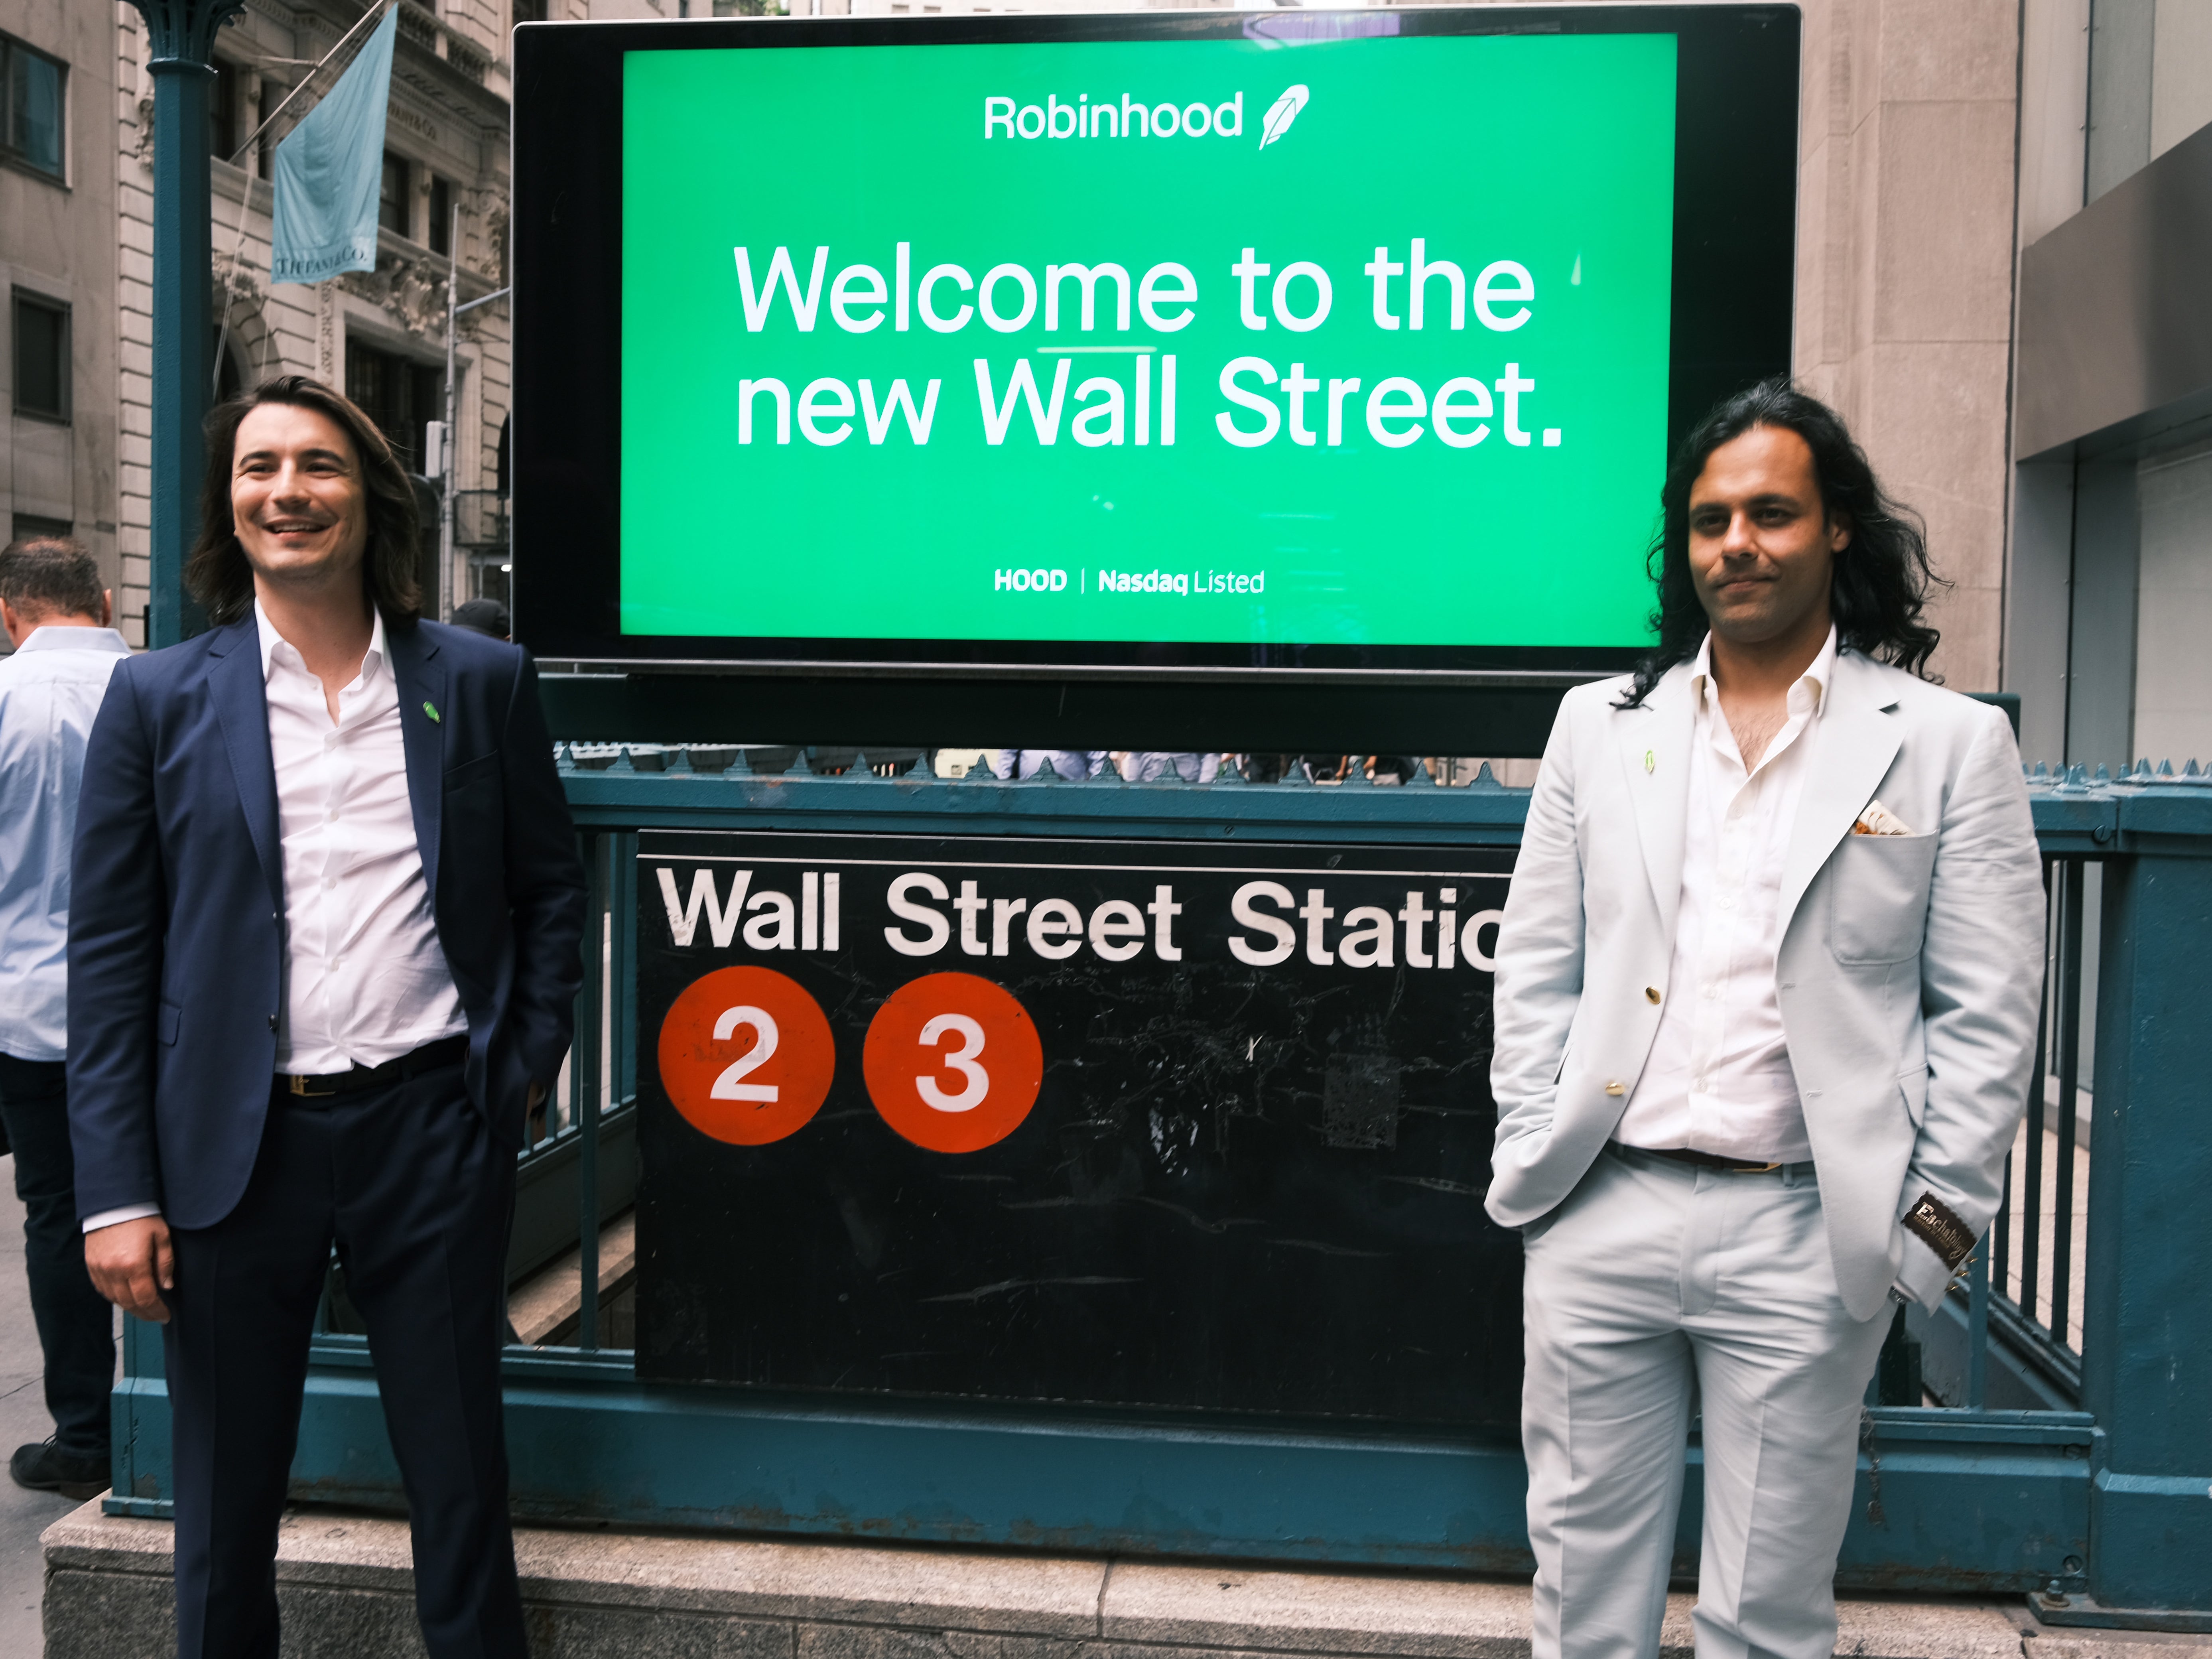 Robinhood Shares Are Set to Begin Trading - The New York Times